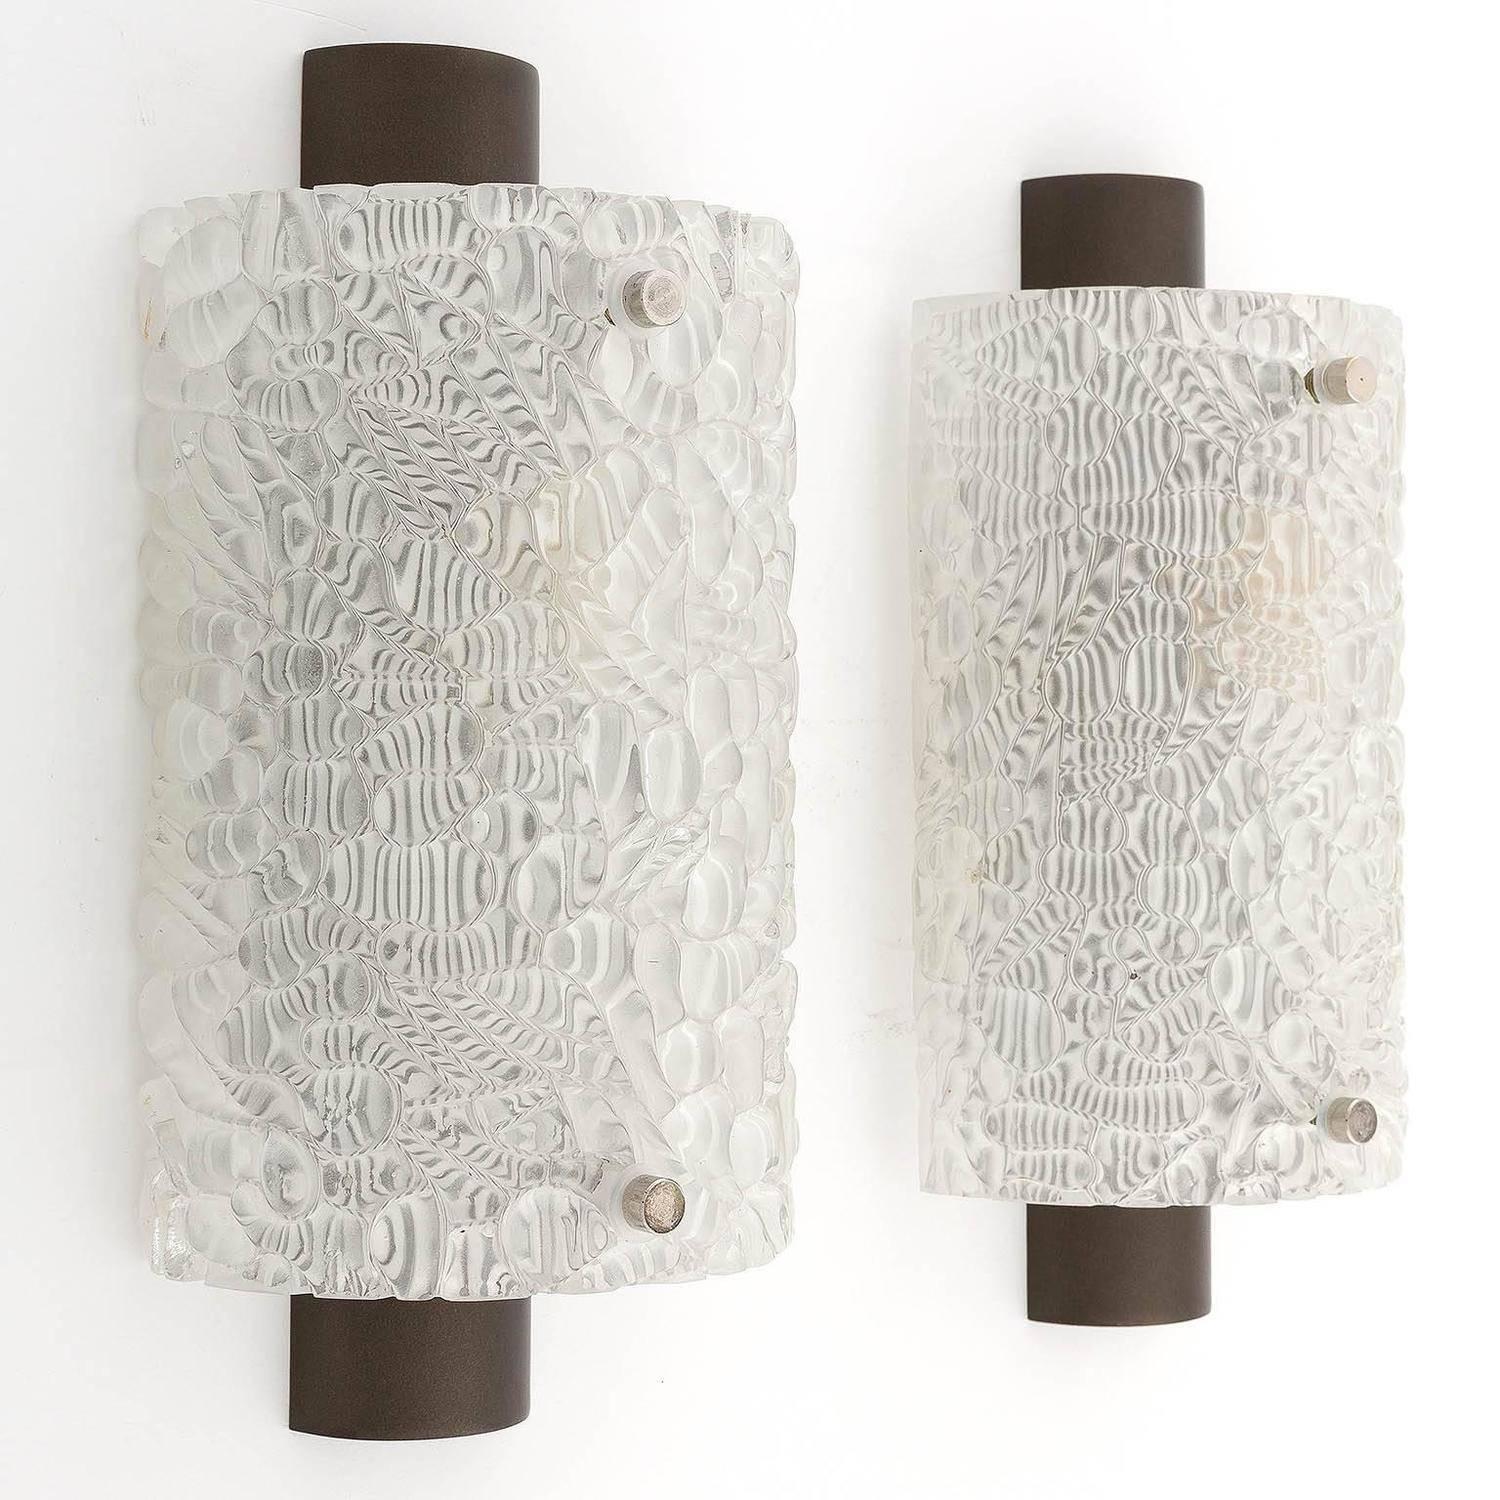 A pair of glass sconces or wall lights by Kalmar, Vienna, Austria, manufactured in Midcentury, circa 1960 (late 1950s or early 1960s).
A curved textured glass is mounted on a satin dark brown metal frame. Each light has one socket for a medium base